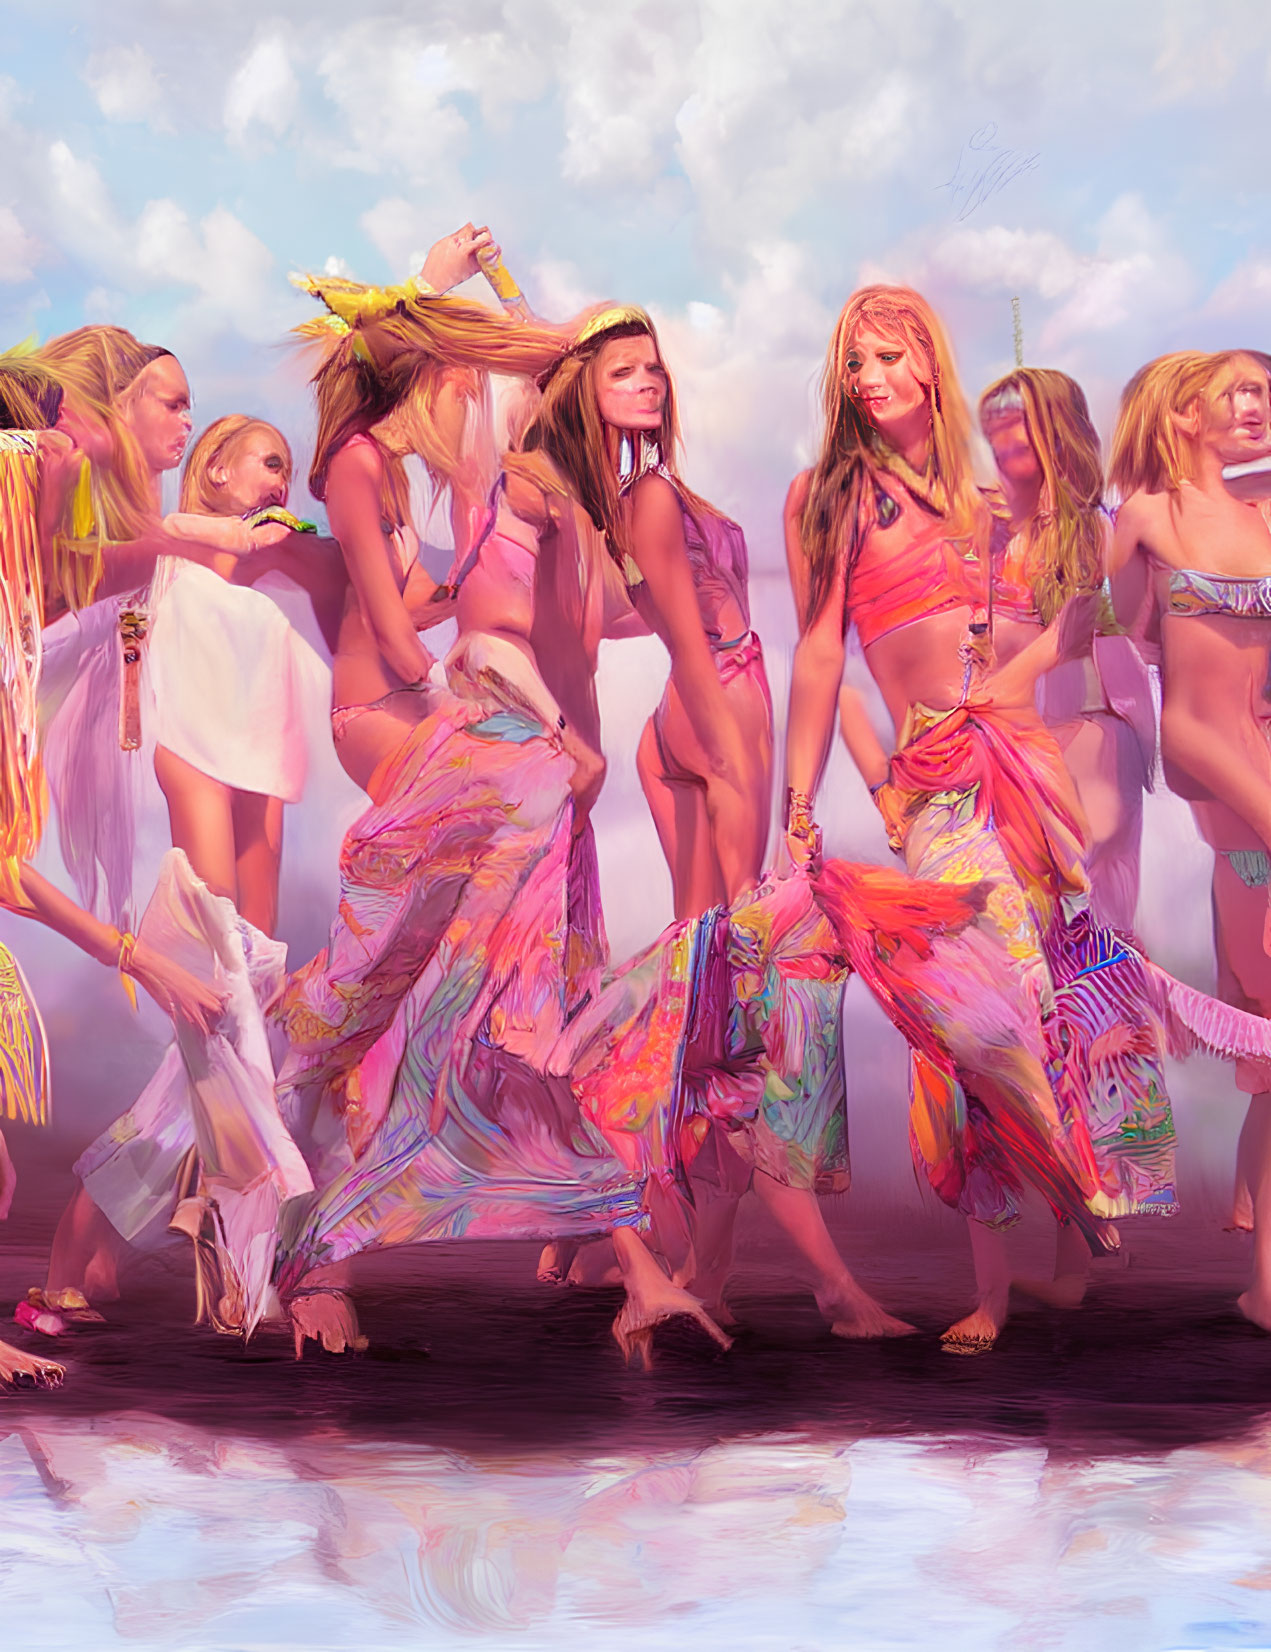 Colorfully dressed animated women dancing joyfully under a cloudy sky.